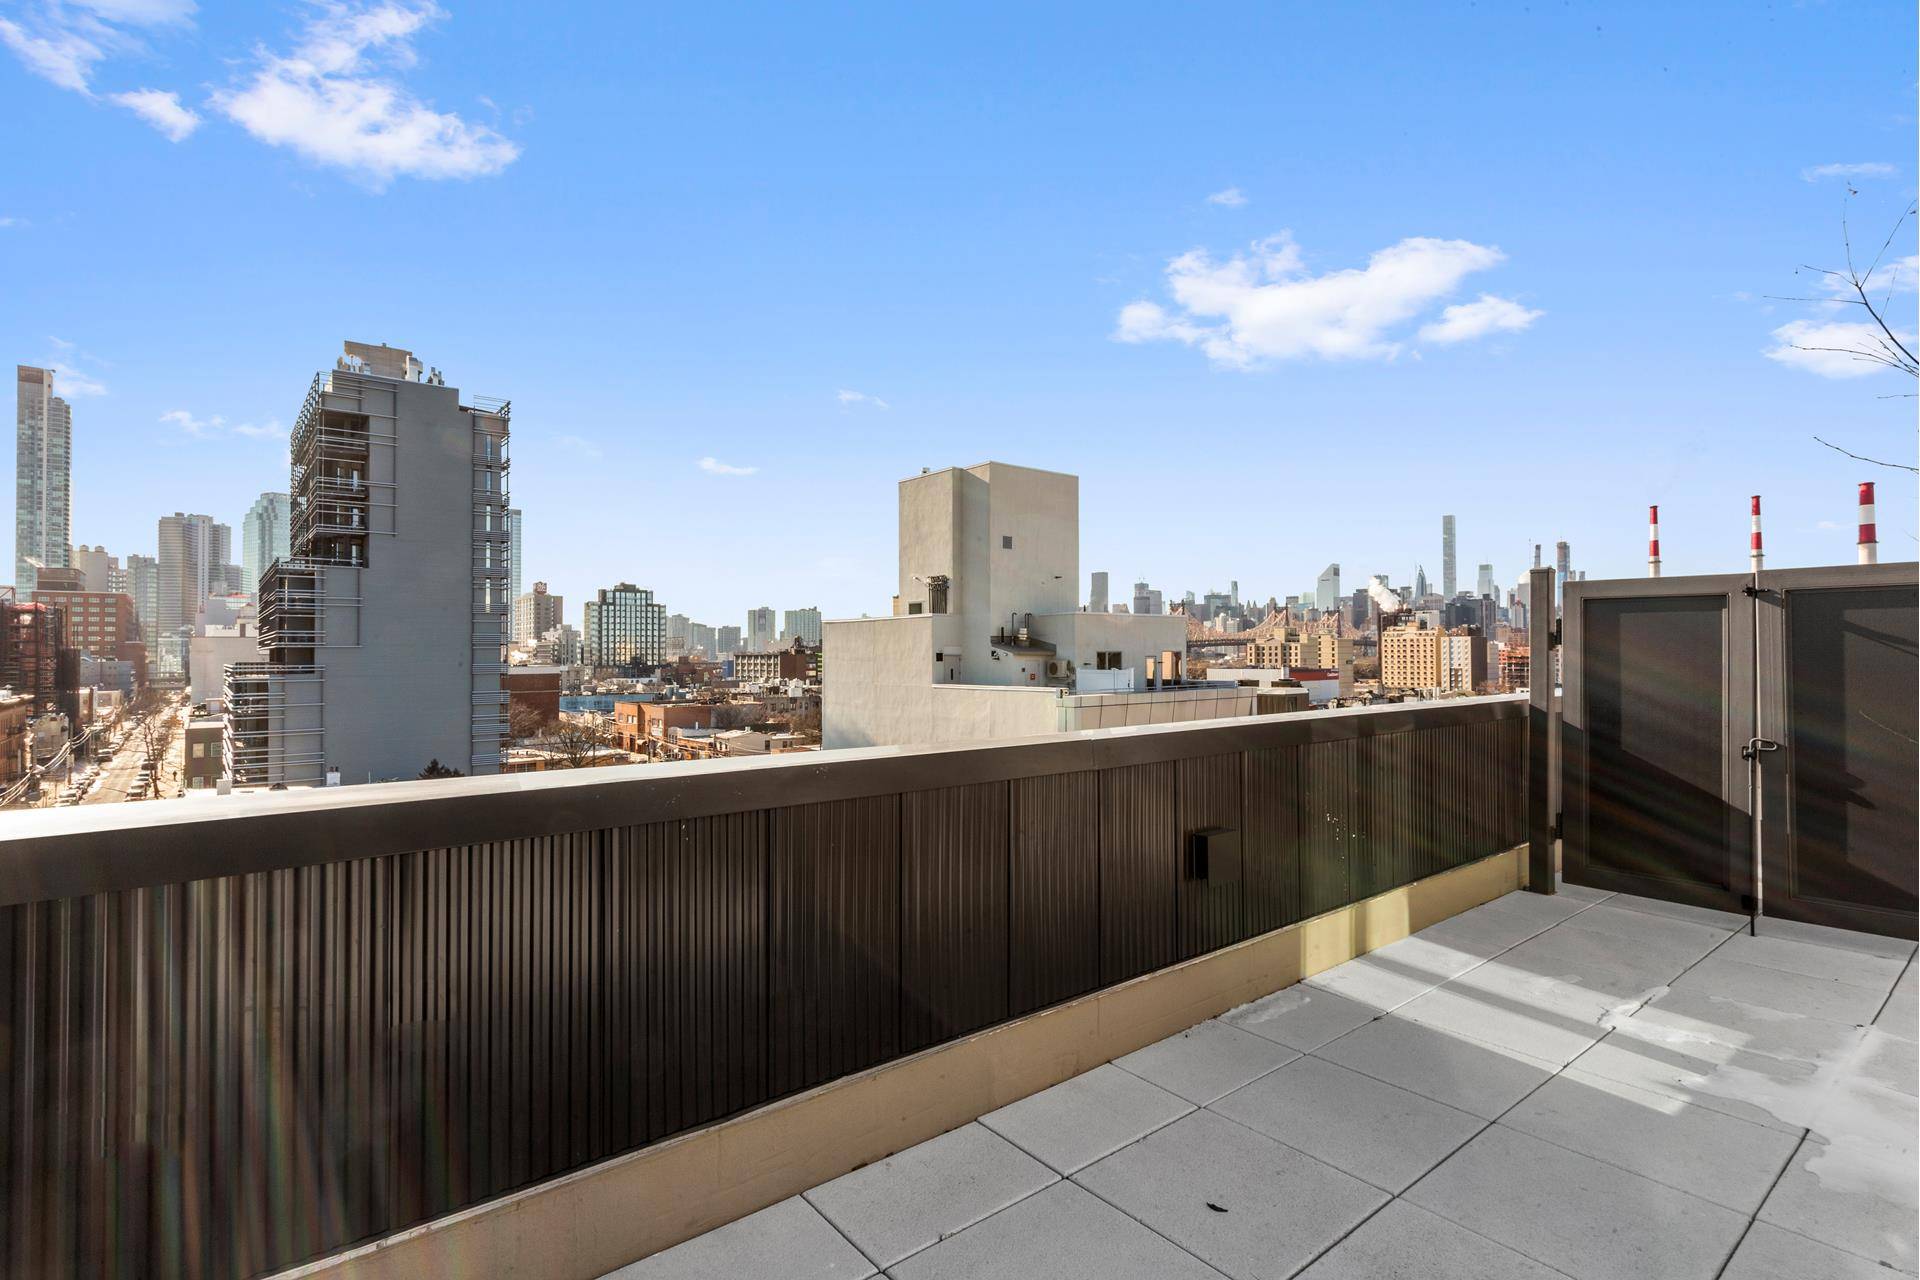 PENTHOUSE ONE BEDROOM APARTMENT BEAUTIFUL PRIVATE TERRACE WITH SKYLINE VIEWSThis thoughtfully laid out residence features oak flooring, high ceilings, and oversized windows.